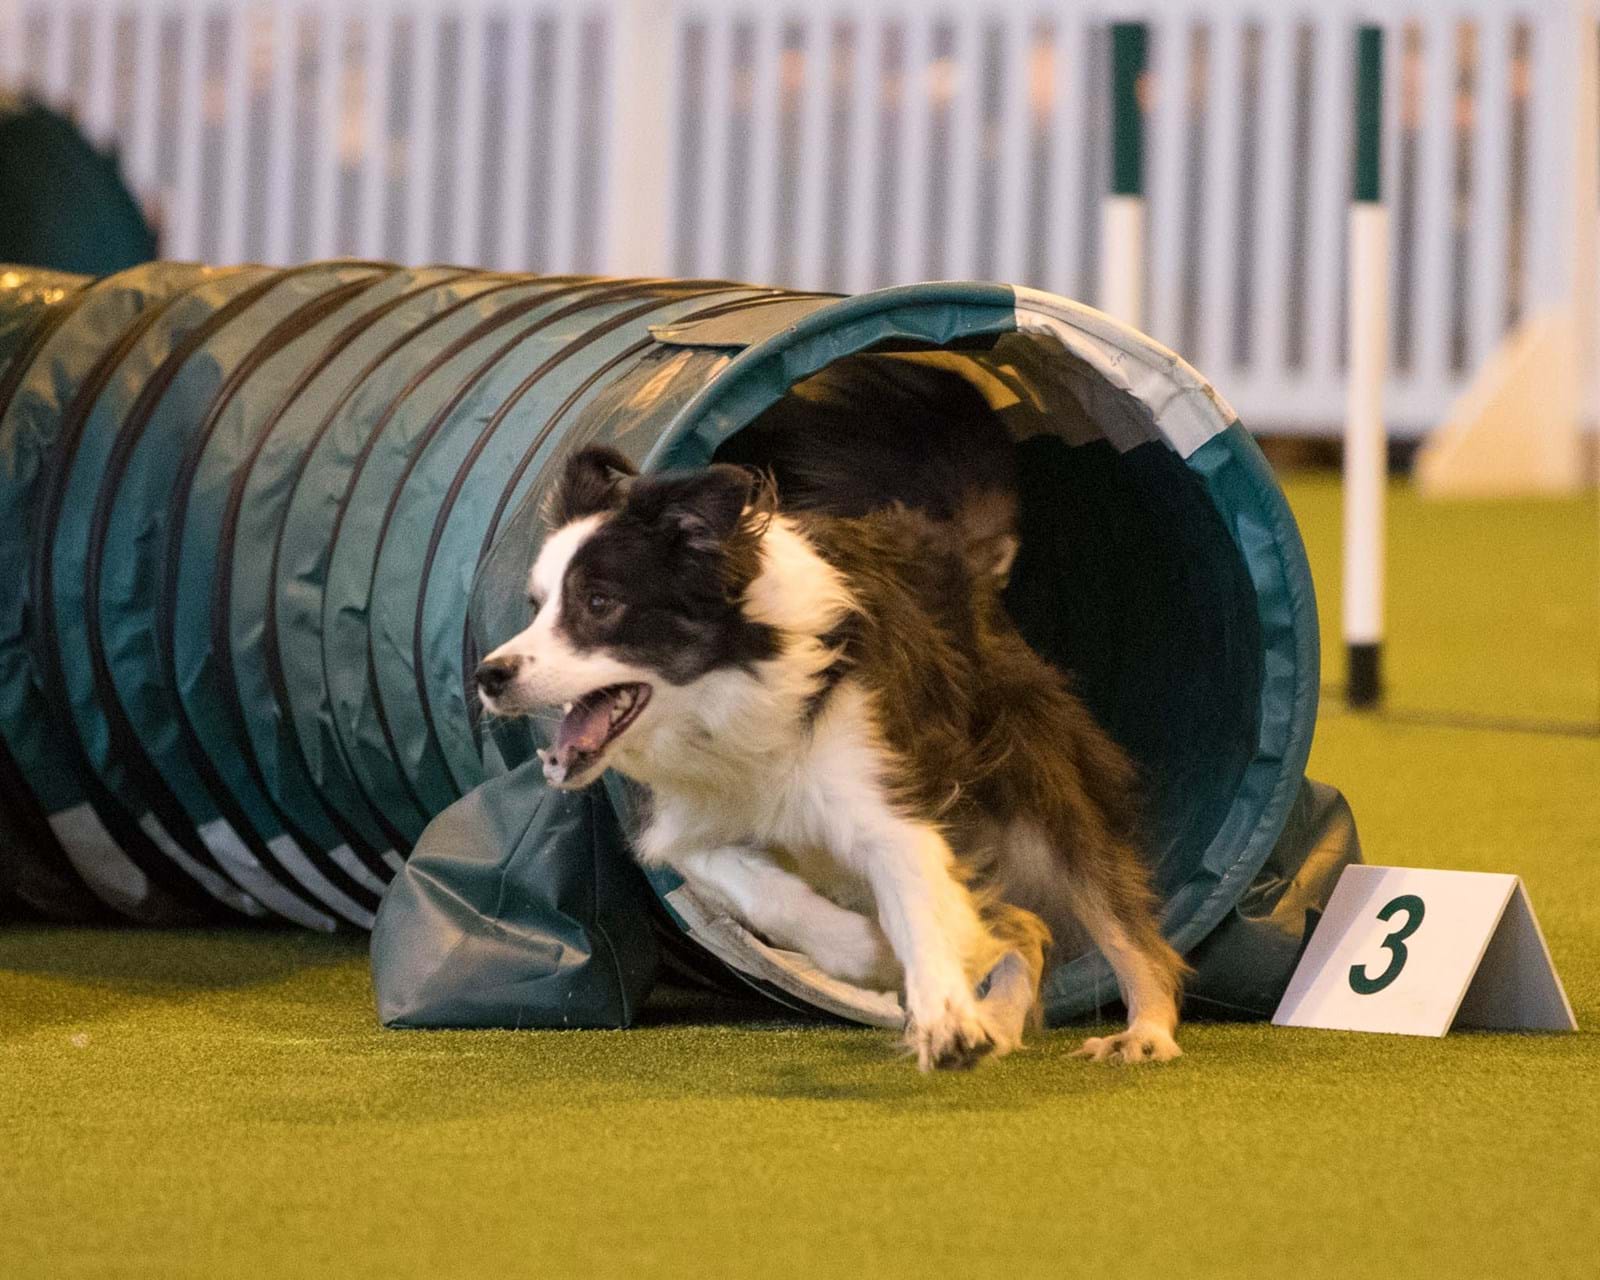 CHANNEL 4 UPS 2018 CRUFTS COVERAGE